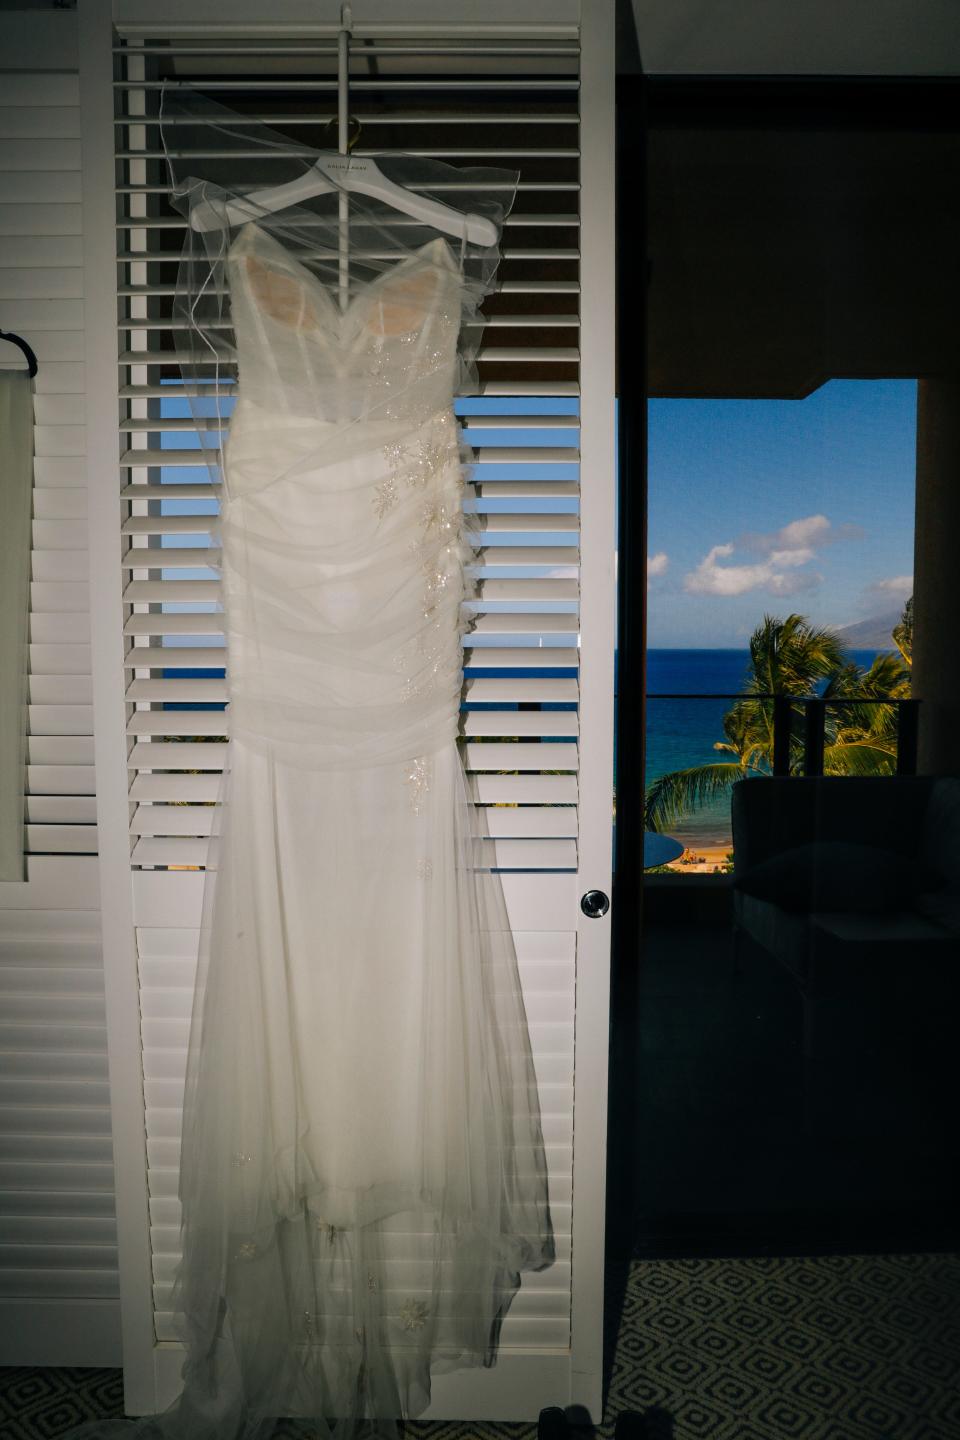 This picture thrills me. The juxtaposition of the tropical backdrop with the tulle and stars on my dress. So good.